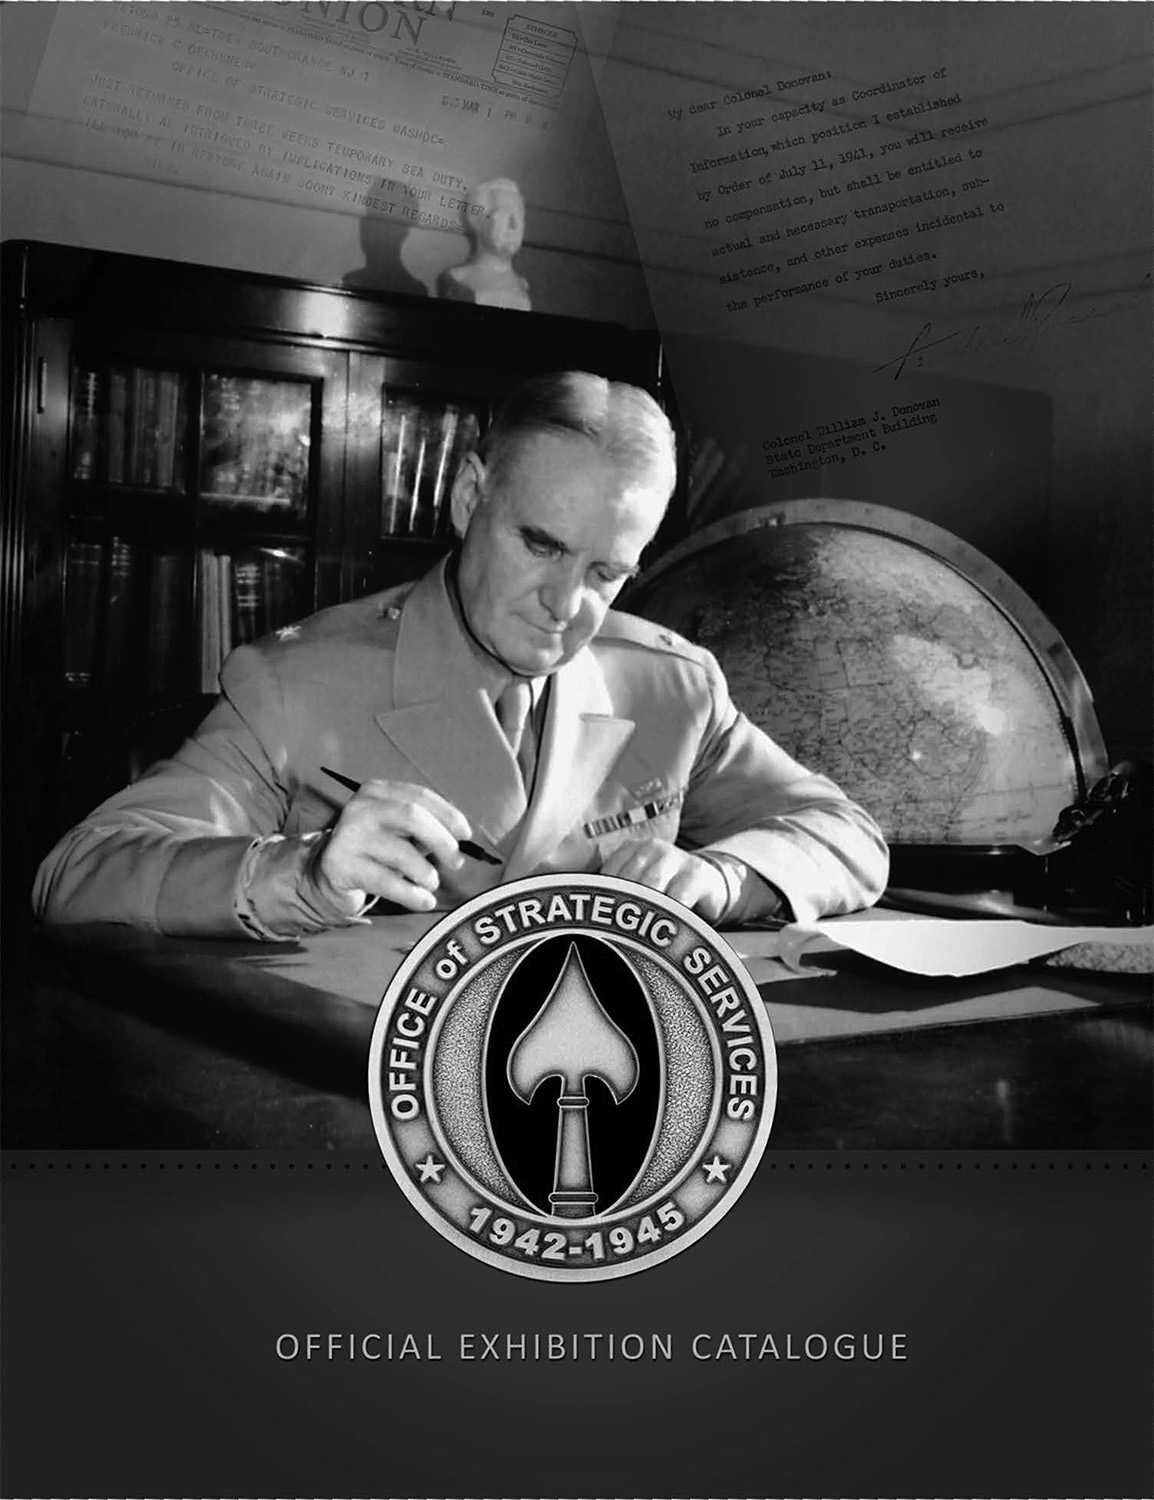 A document cover showing a man sitting at a desk and the oss seal.